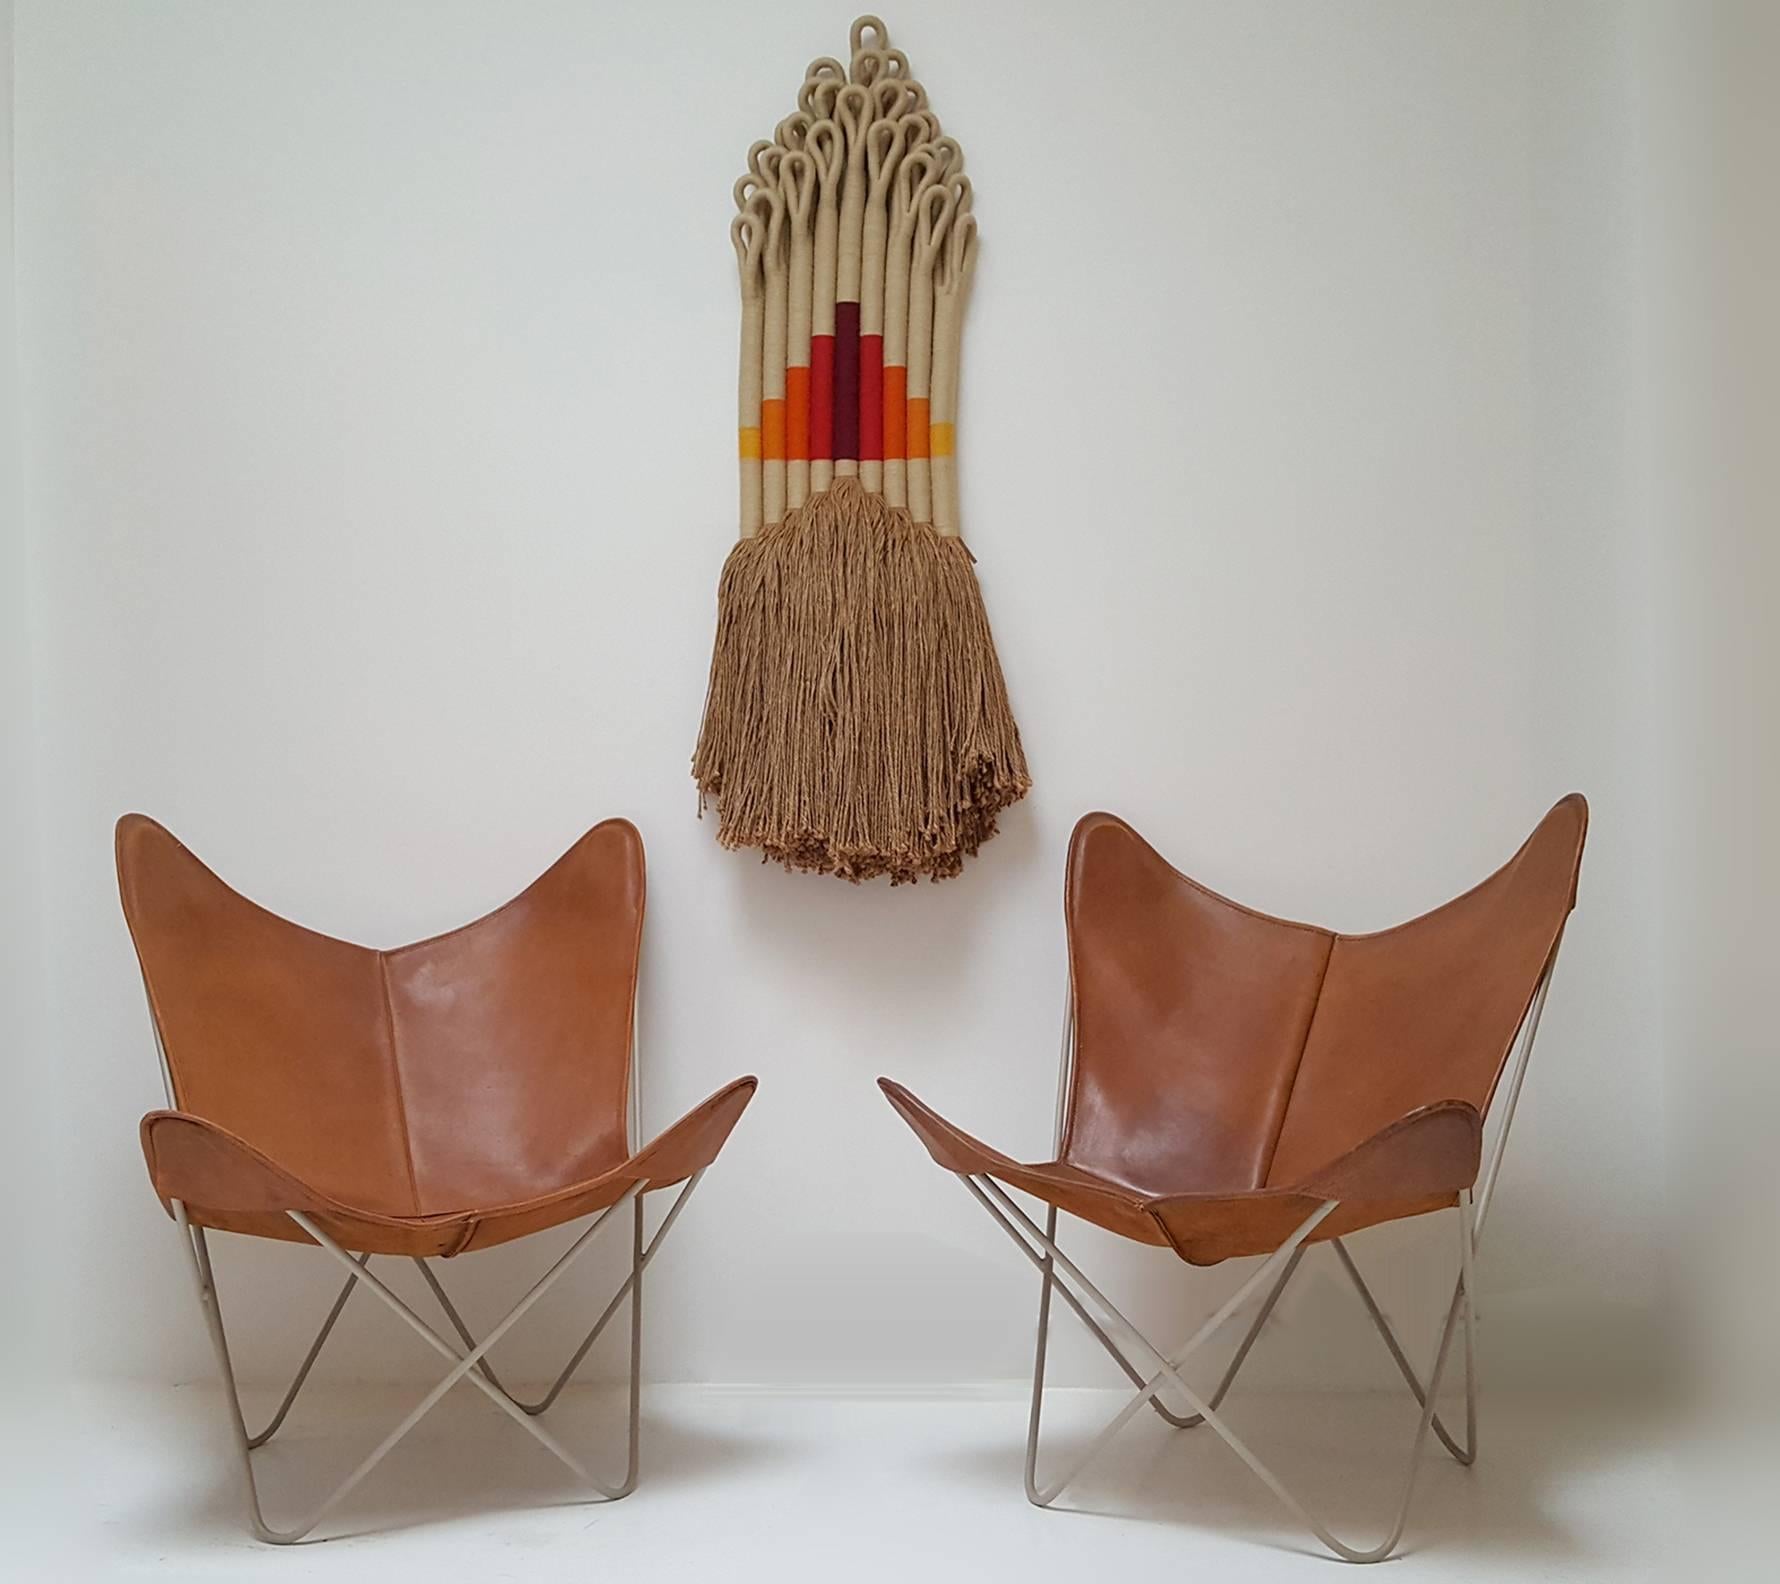 Early pair of Knoll Hardoy butterfly chairs with beautiful original patinated cognac leather slings. Frames powder-coated in a matte Khaki paint to compliment the slings. Suitable for indoor or outdoor use.